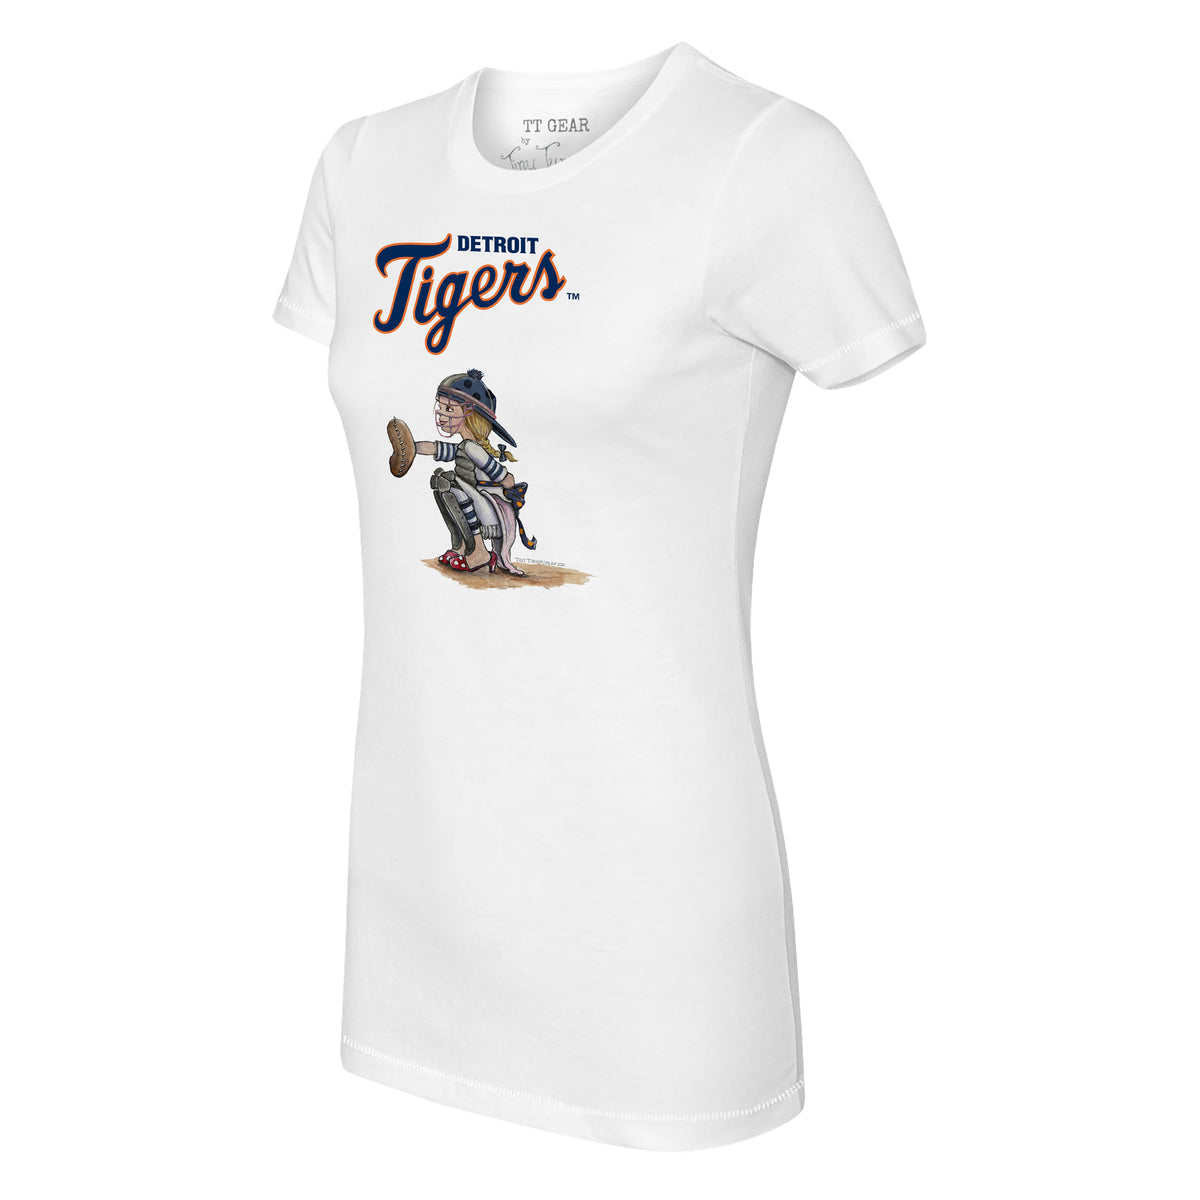 Detroit Tigers Kate the Catcher Tee Shirt